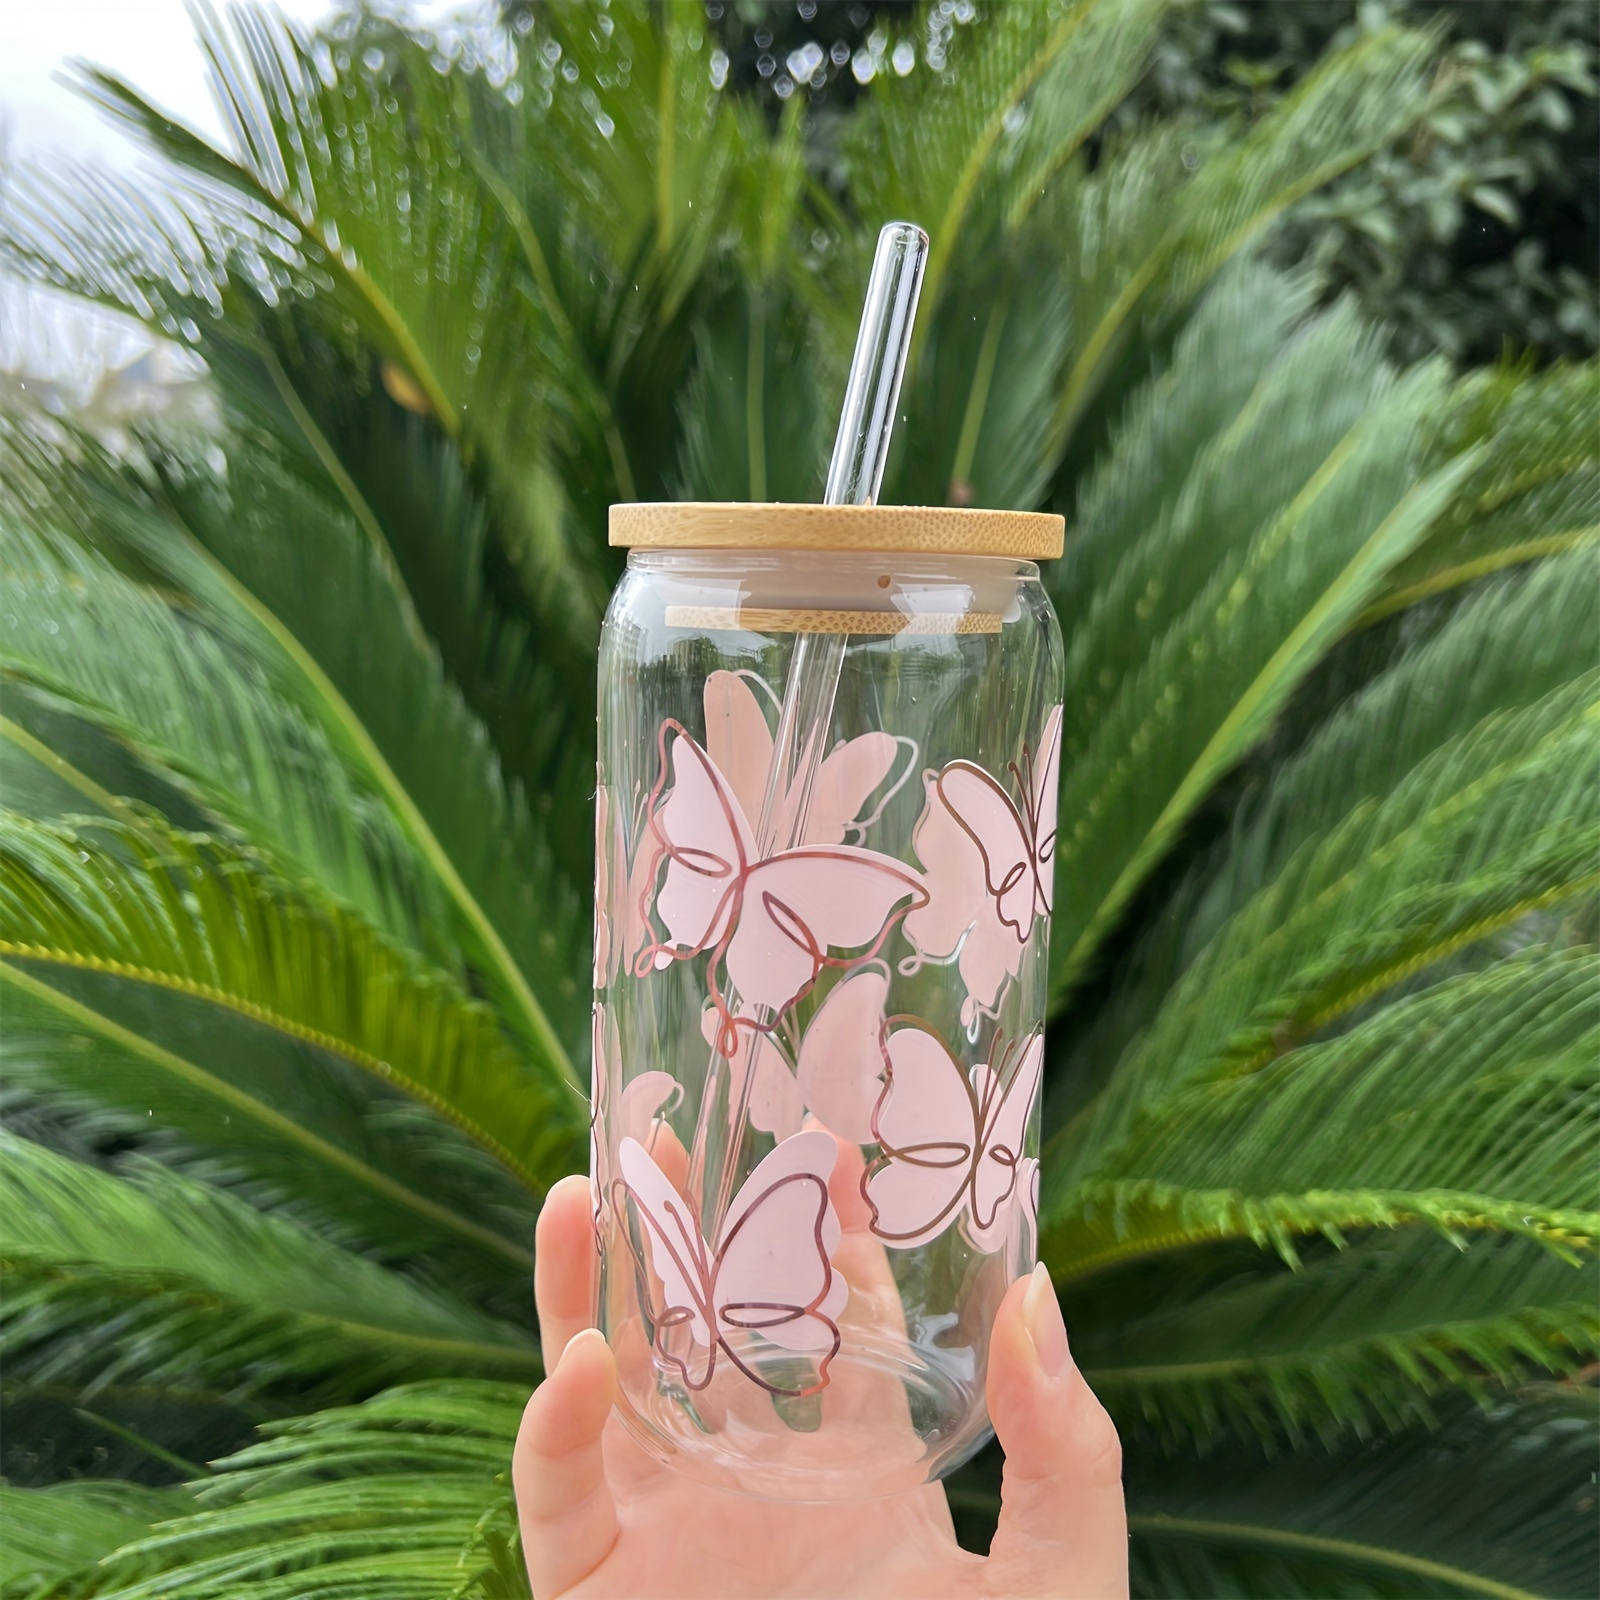 16oz pink Smile Flower Themed Libbey Glass Cans Set (1pc Glass Cup+1pc  Bamboo Lid+1pc Glass Straw +1pc Straw Brush), Beer Glass Cans, Soda, Iced  Coff